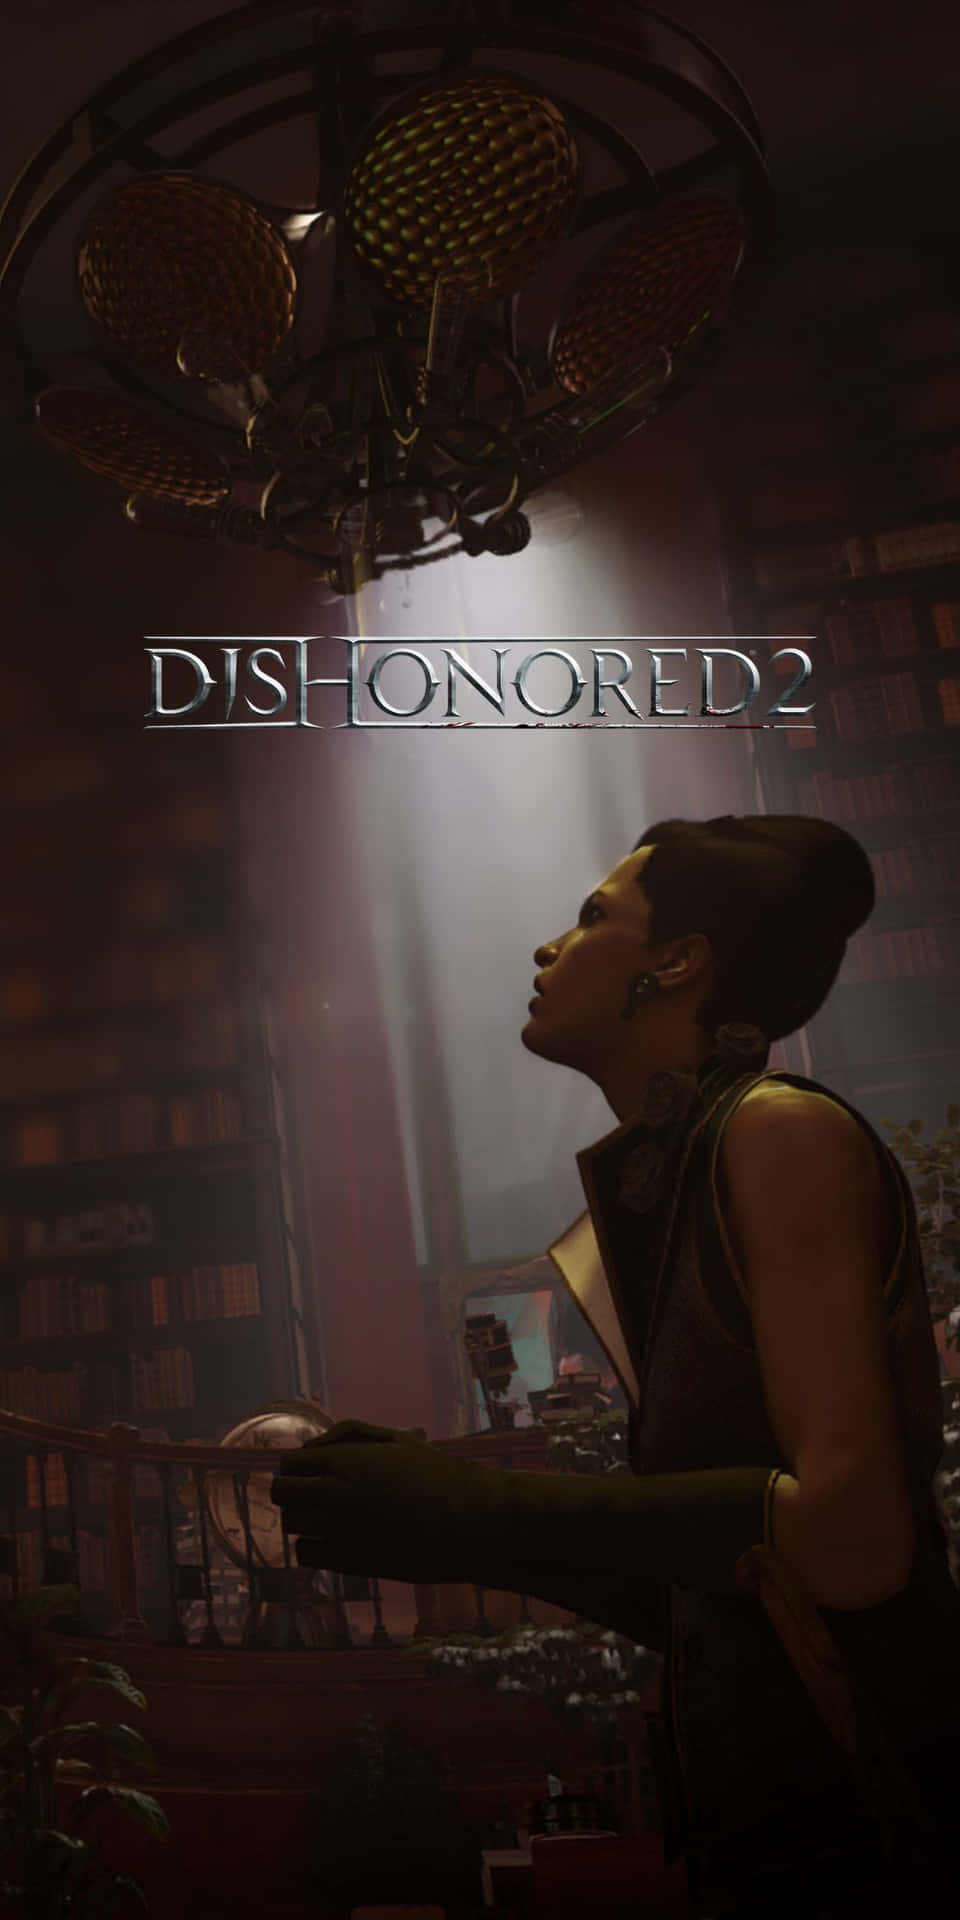 Enjoy the vibrant scenery of Dishonored 2 on the Google Pixel 3